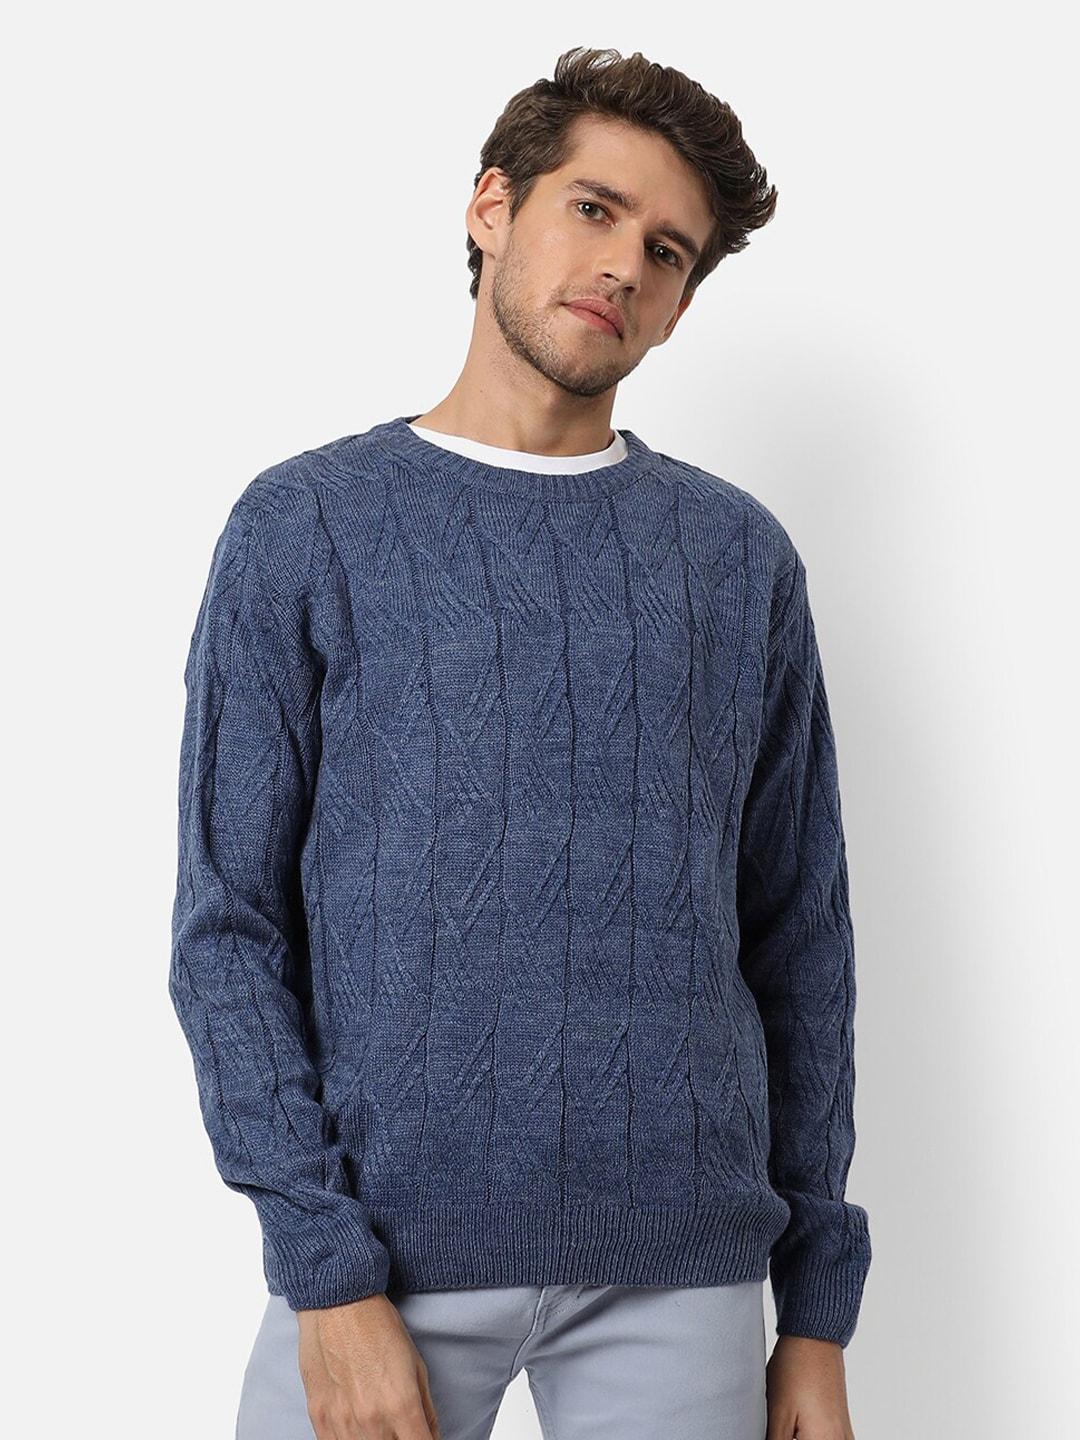 Campus Sutra Men Navy Blue Cable Knit Pullover